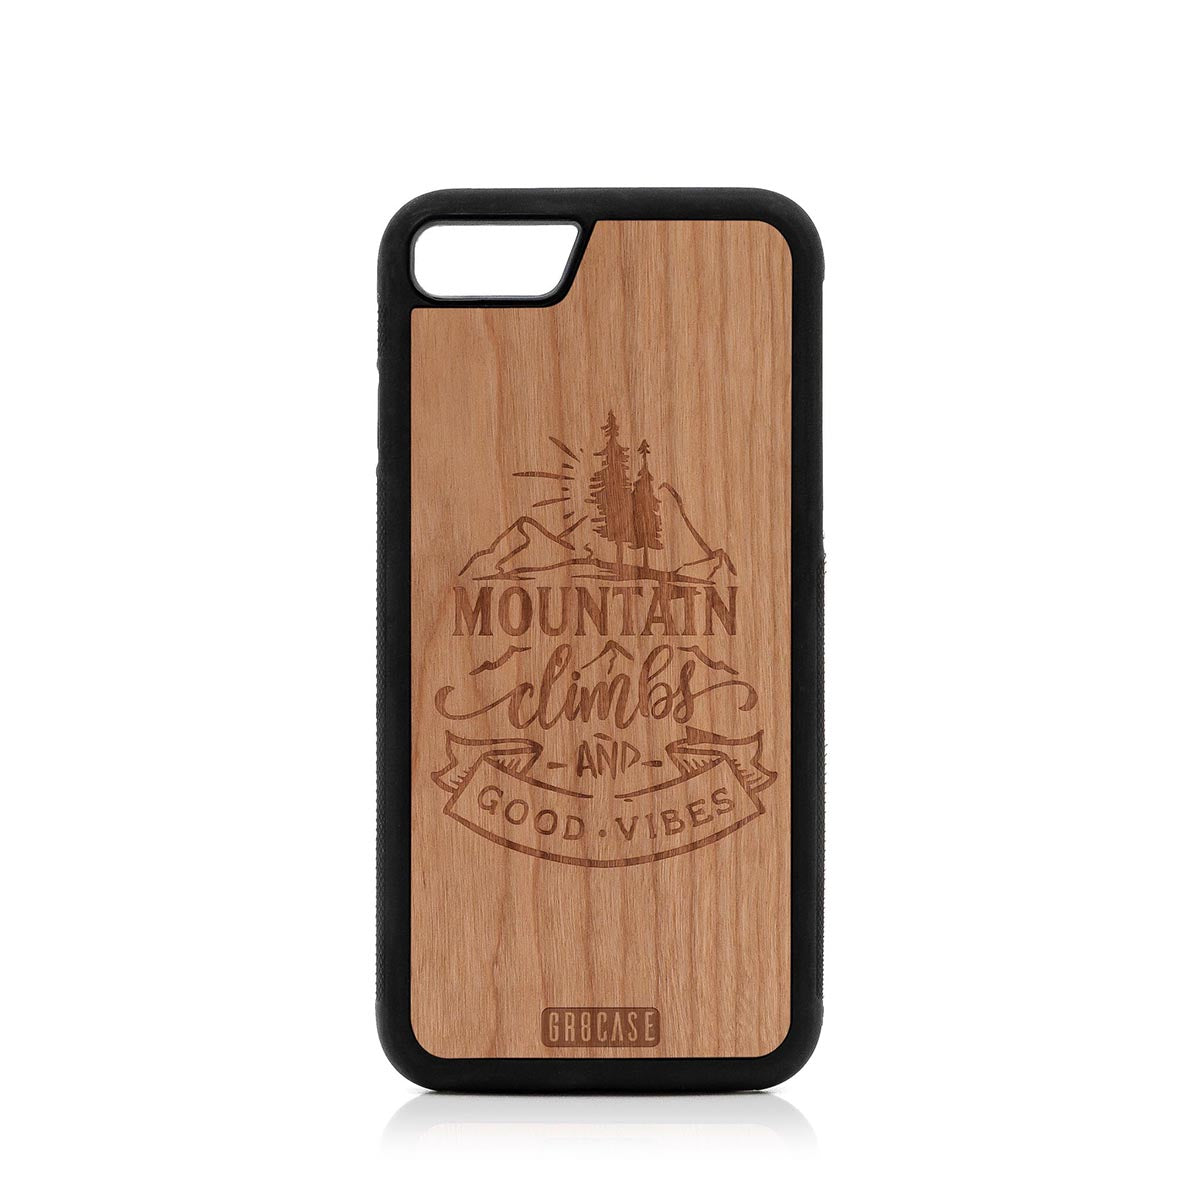 Mountain Climbs And Good Vibes Design Wood Case For iPhone 7/8 by GR8CASE